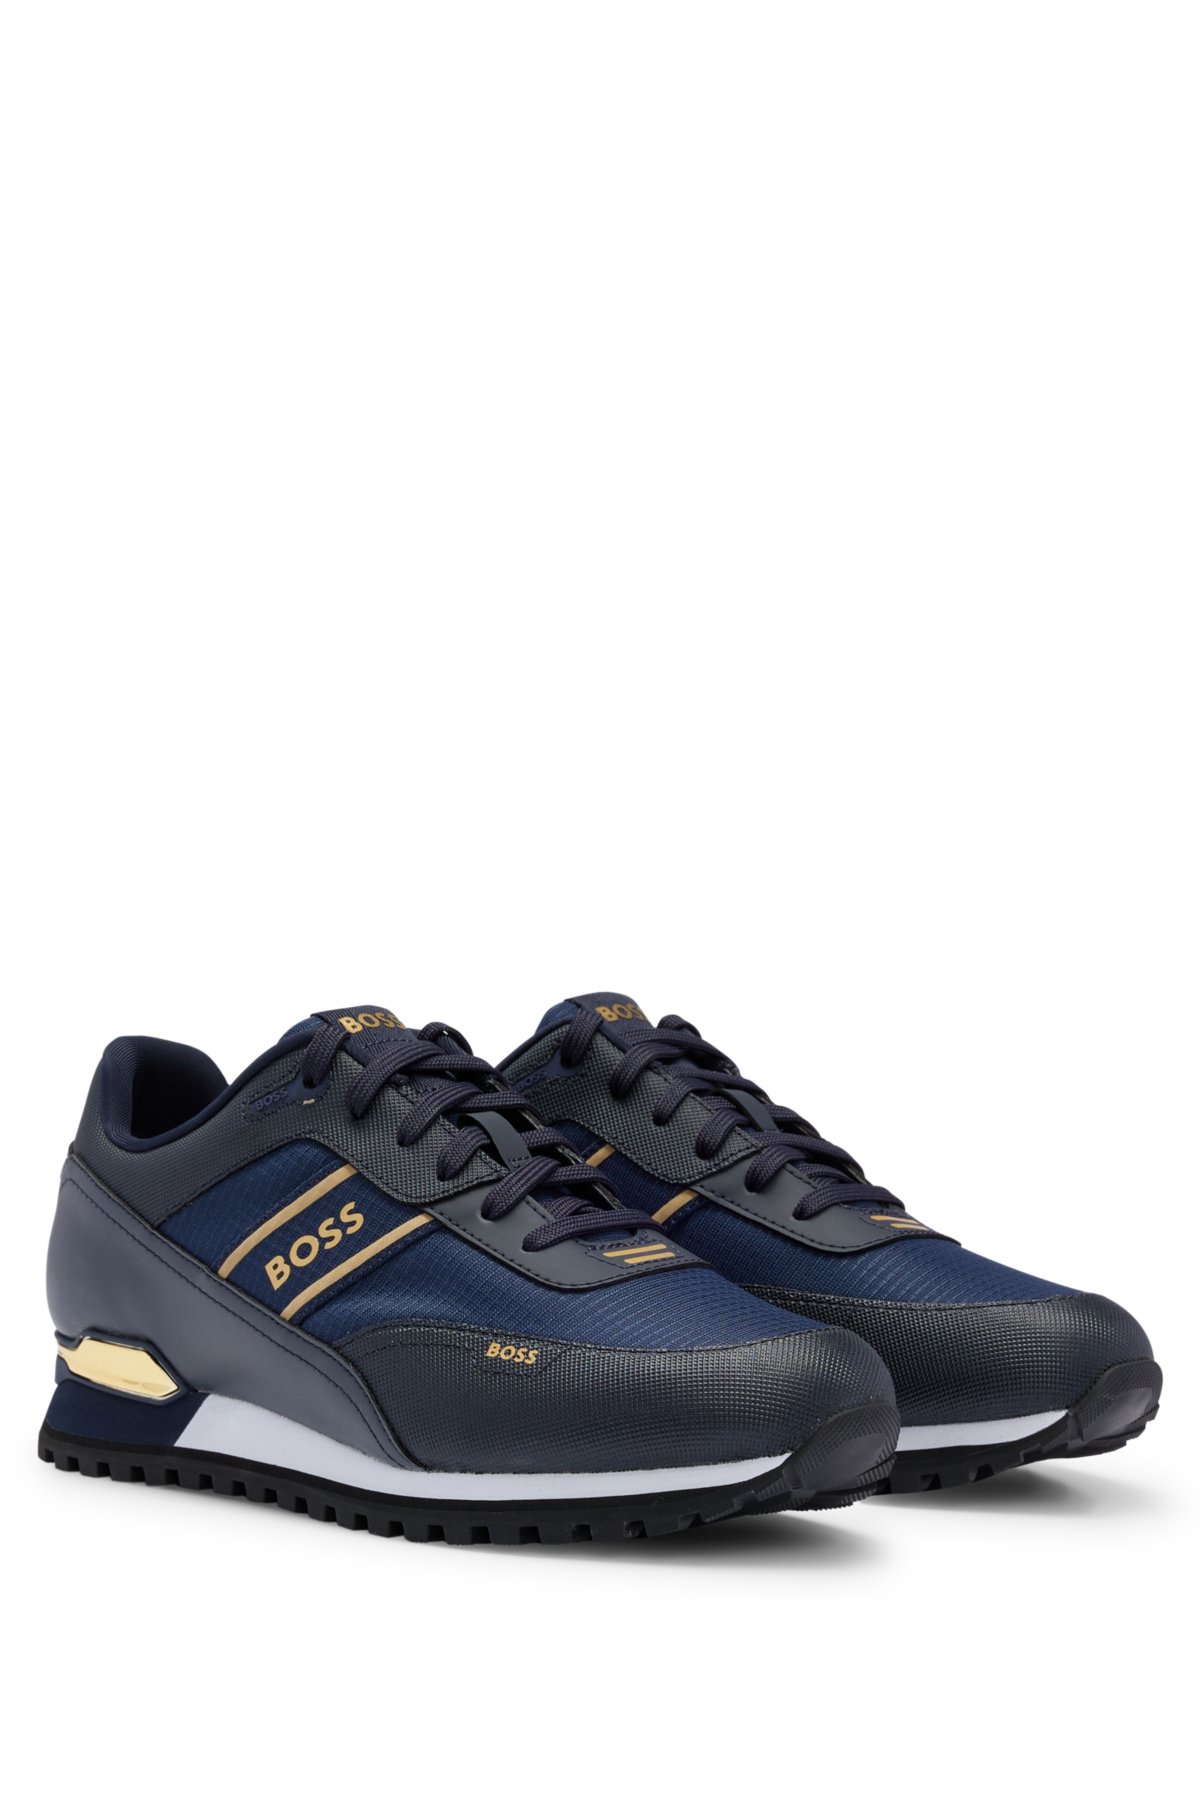 Chaussures Hugo Boss Homme taille 44